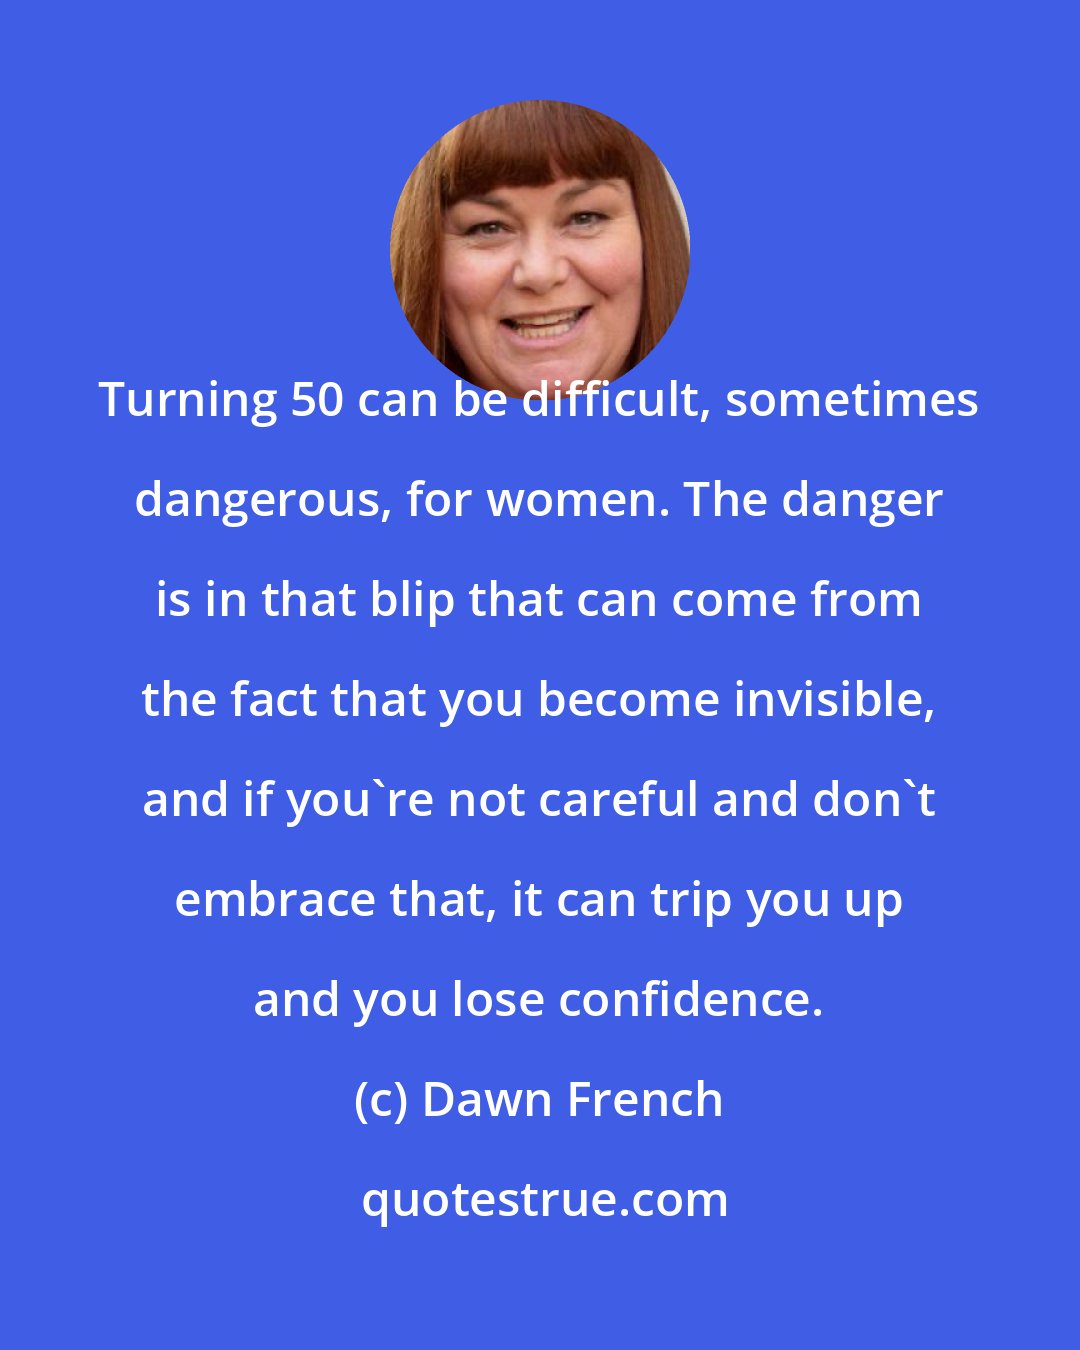 Dawn French: Turning 50 can be difficult, sometimes dangerous, for women. The danger is in that blip that can come from the fact that you become invisible, and if you're not careful and don't embrace that, it can trip you up and you lose confidence.